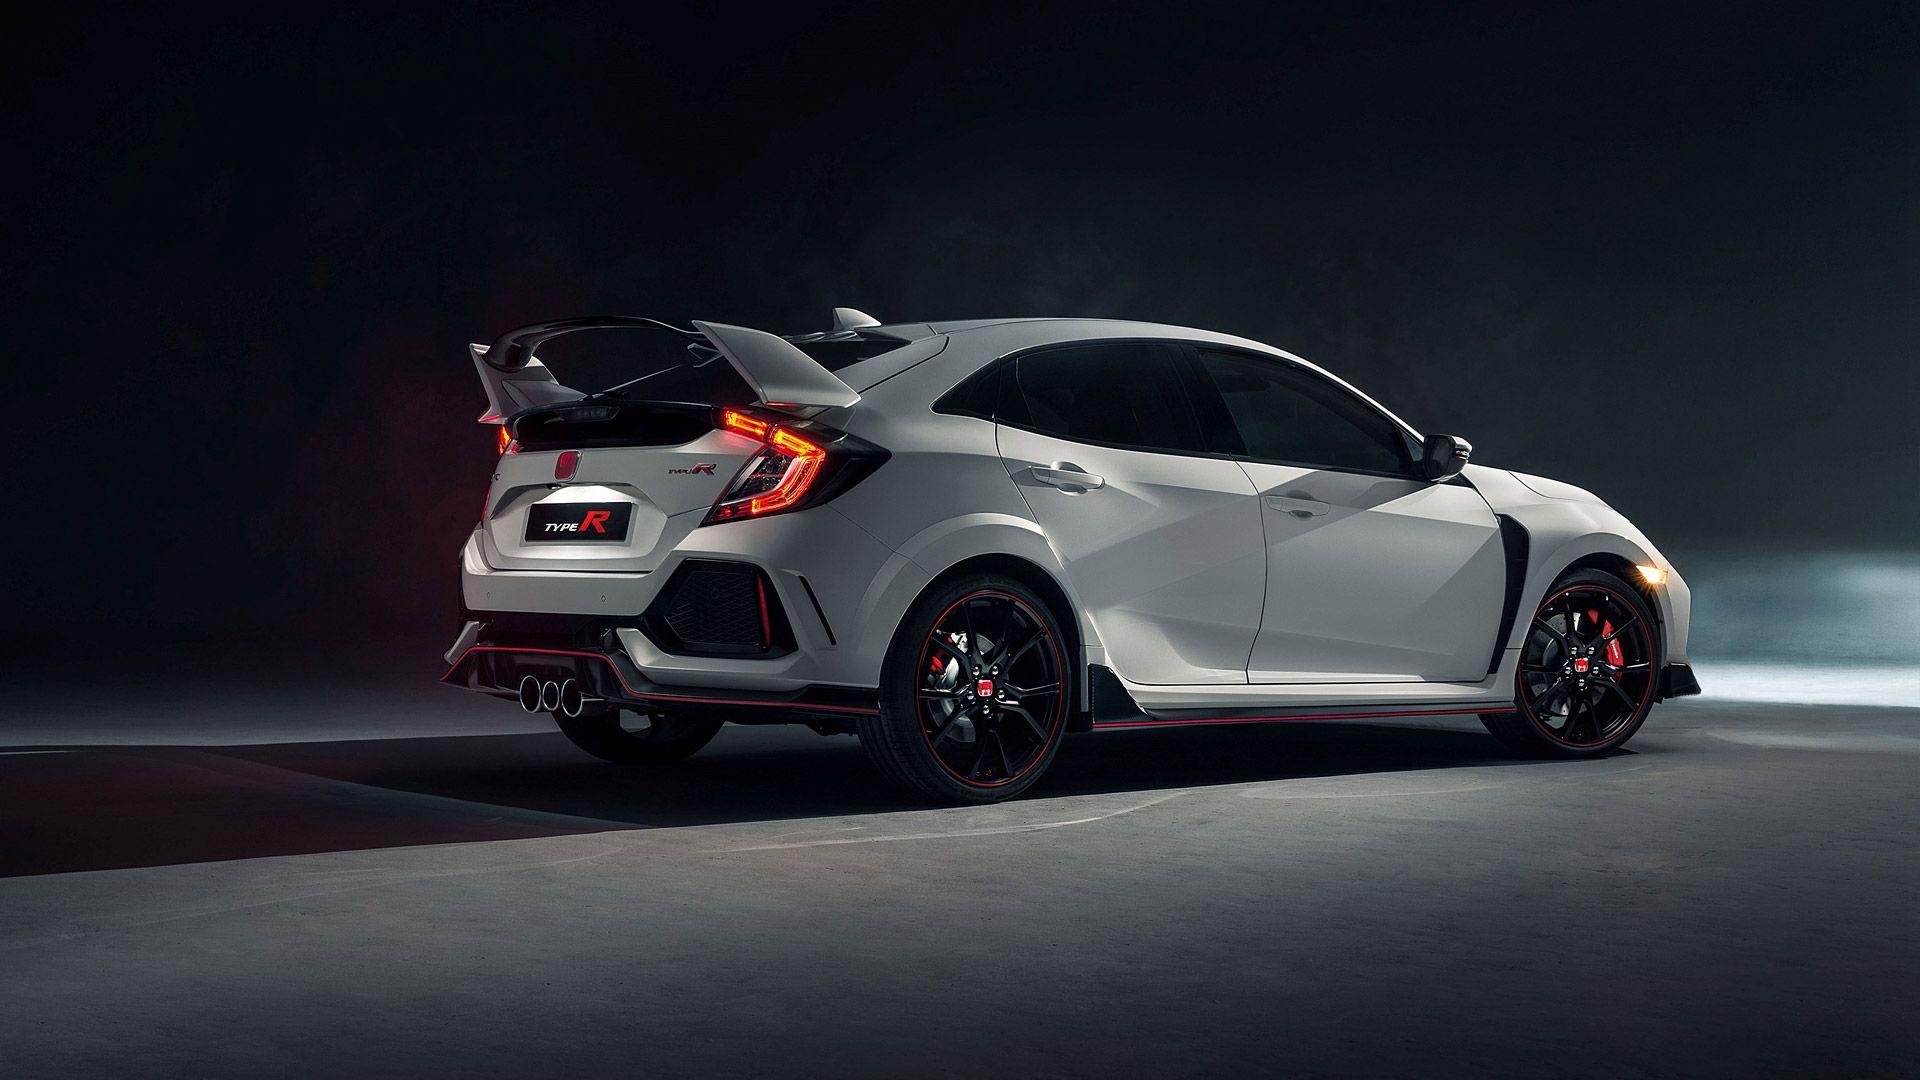 Honda Civic type R wallpaper by Marcofrg  Download on ZEDGE  0f7b